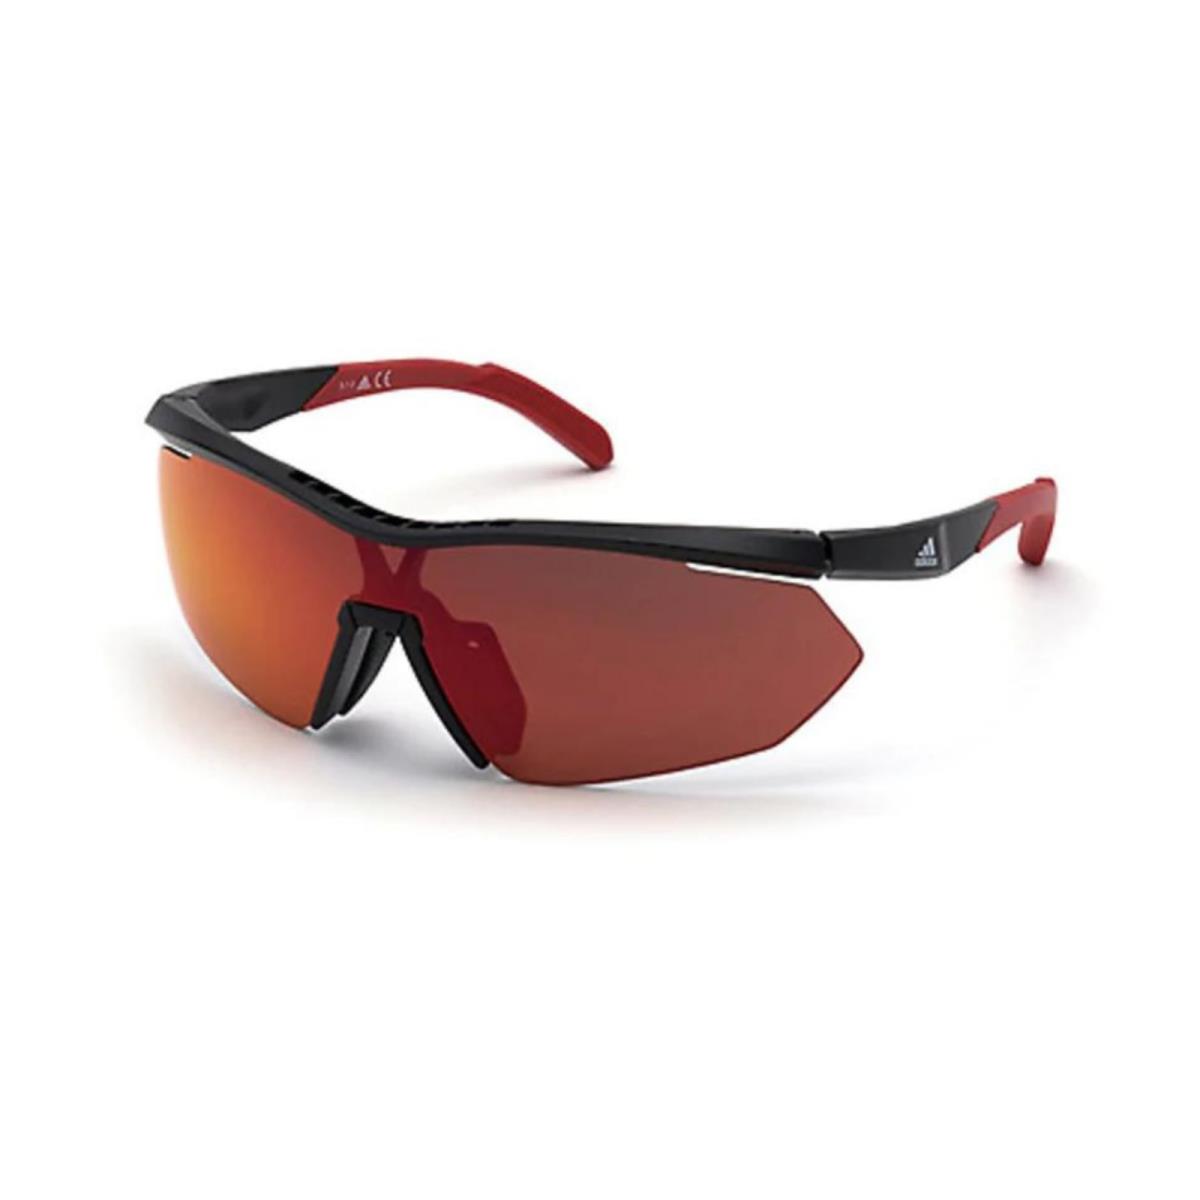 Adidas Sunglasses 0SP0027/S 01L Semi Rimless with Red Mirror For Men